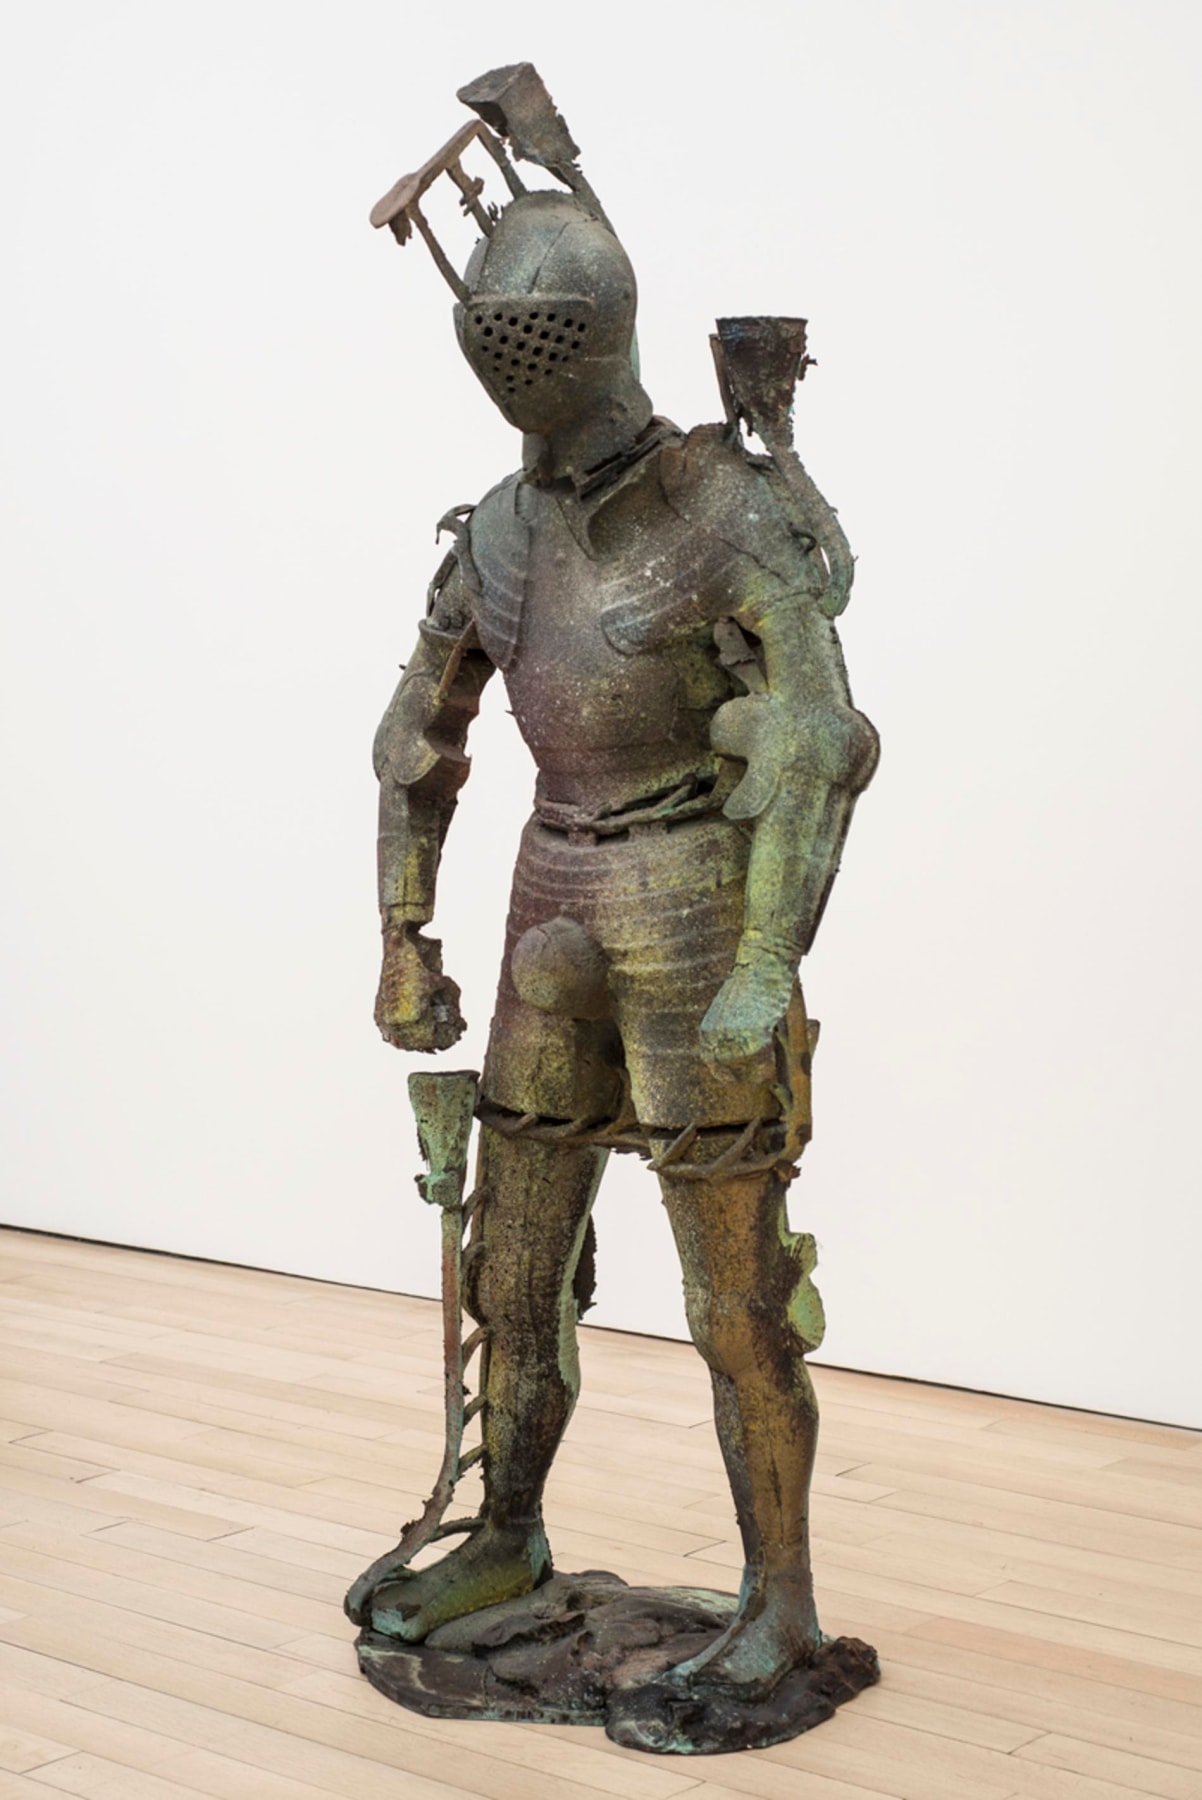 statue of a medieval knight with green and dark colored hues